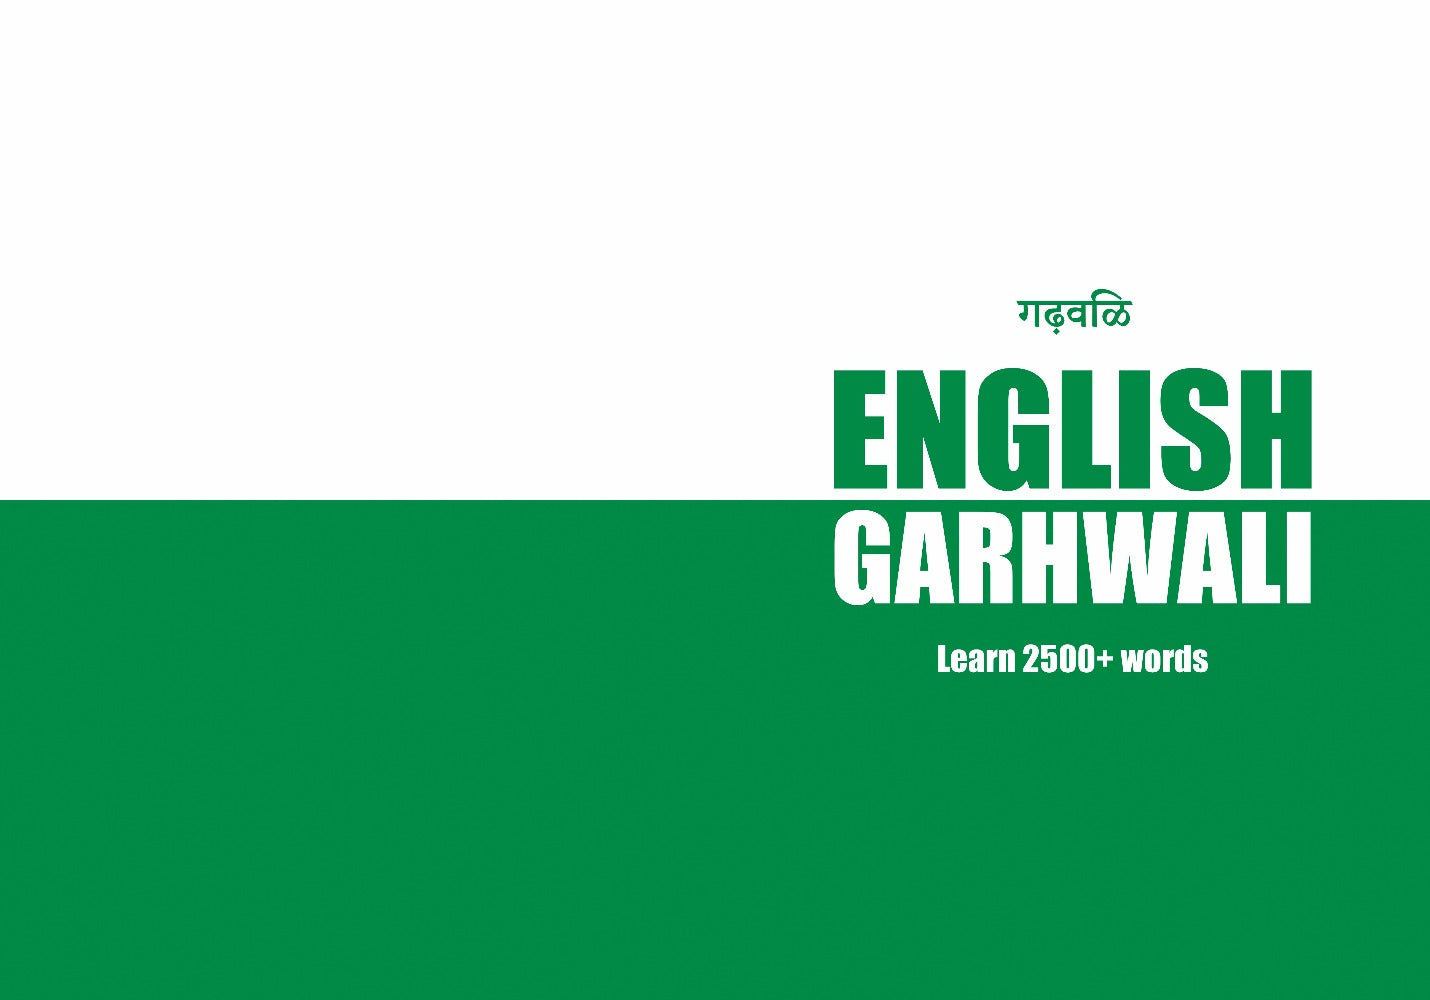 Garhwali language learning notebook cover